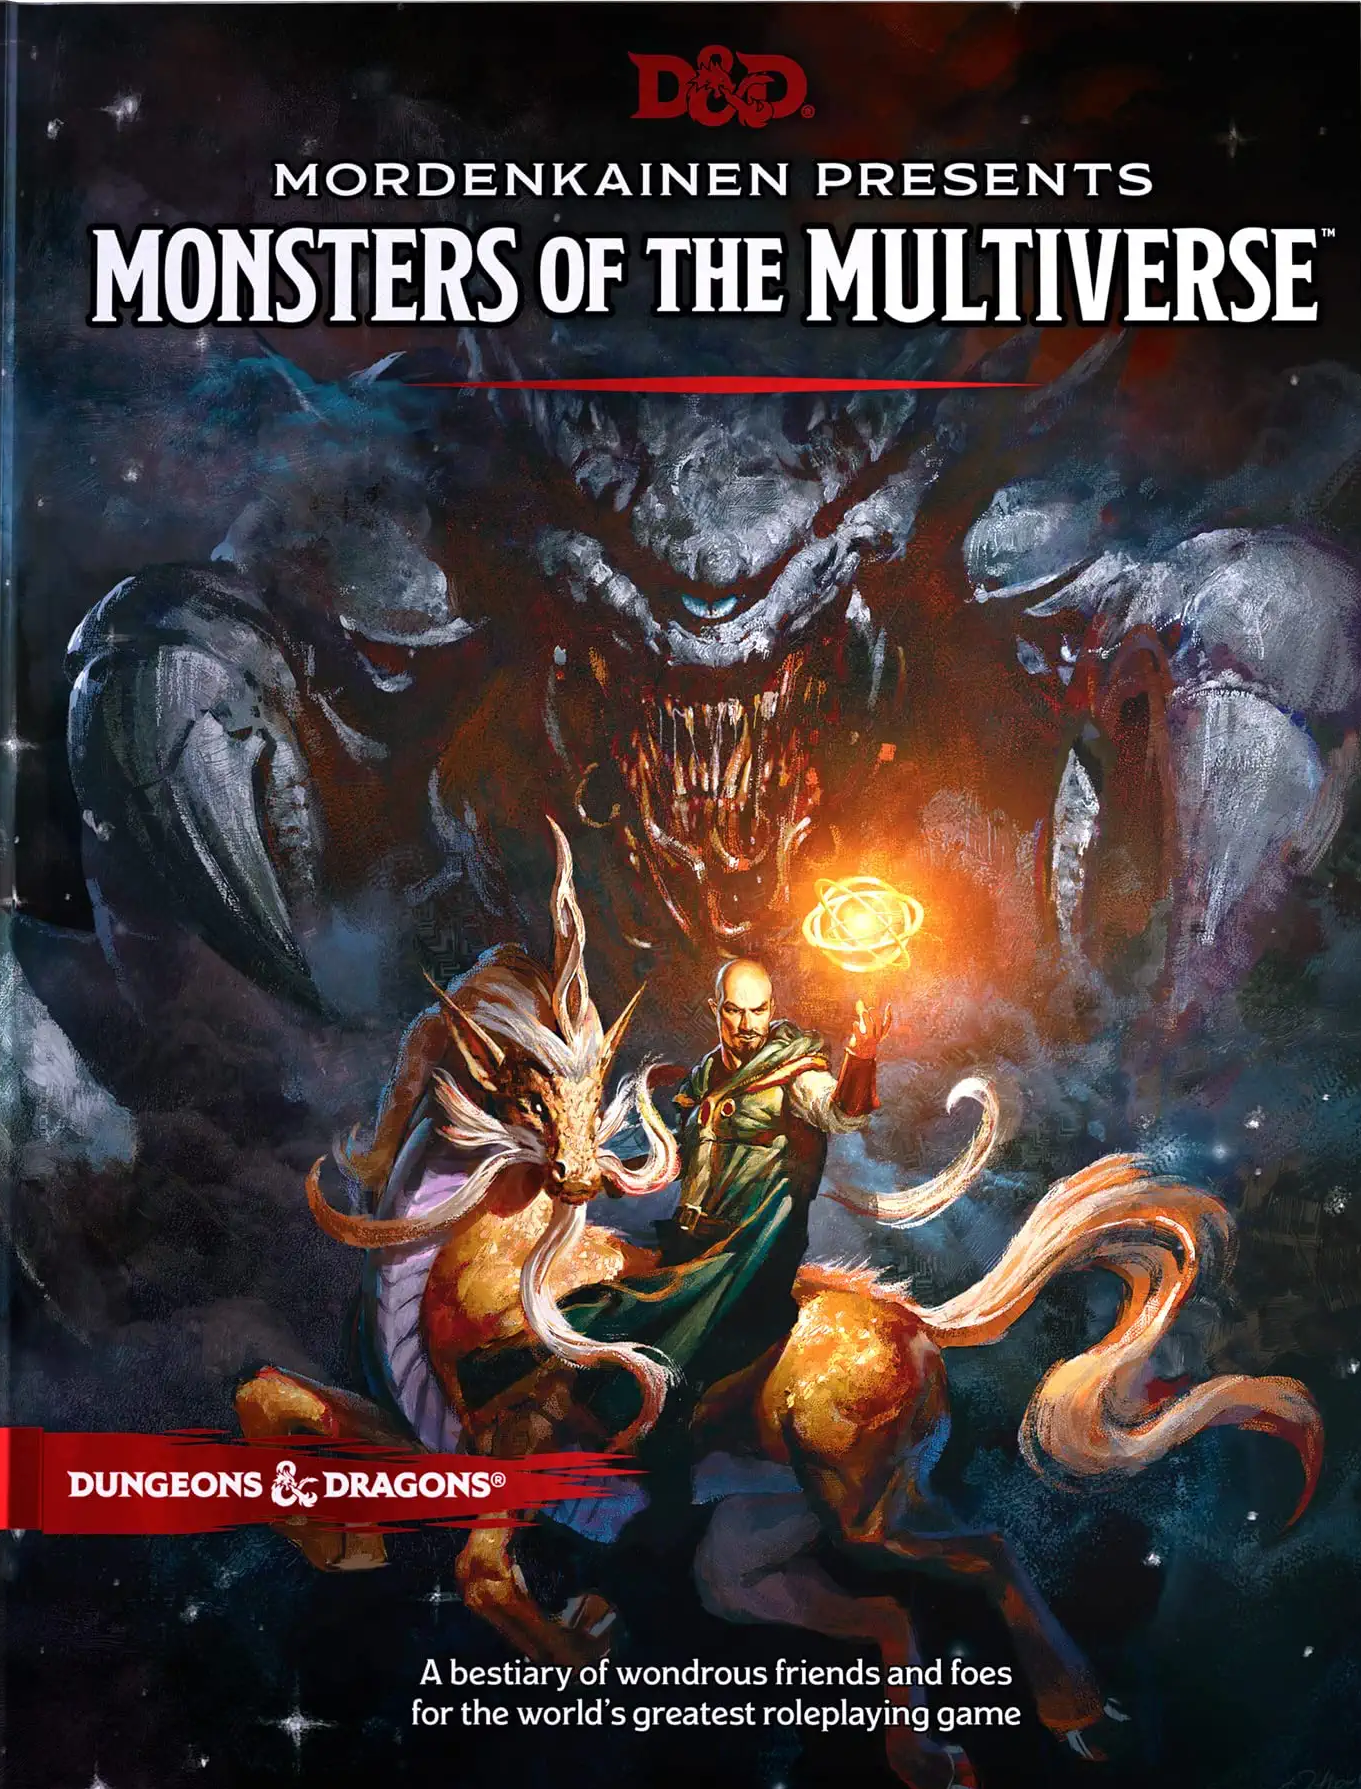 mordenkainen-presents-monsters-of-the-multiverse-best-dungeons-and-dragons-book